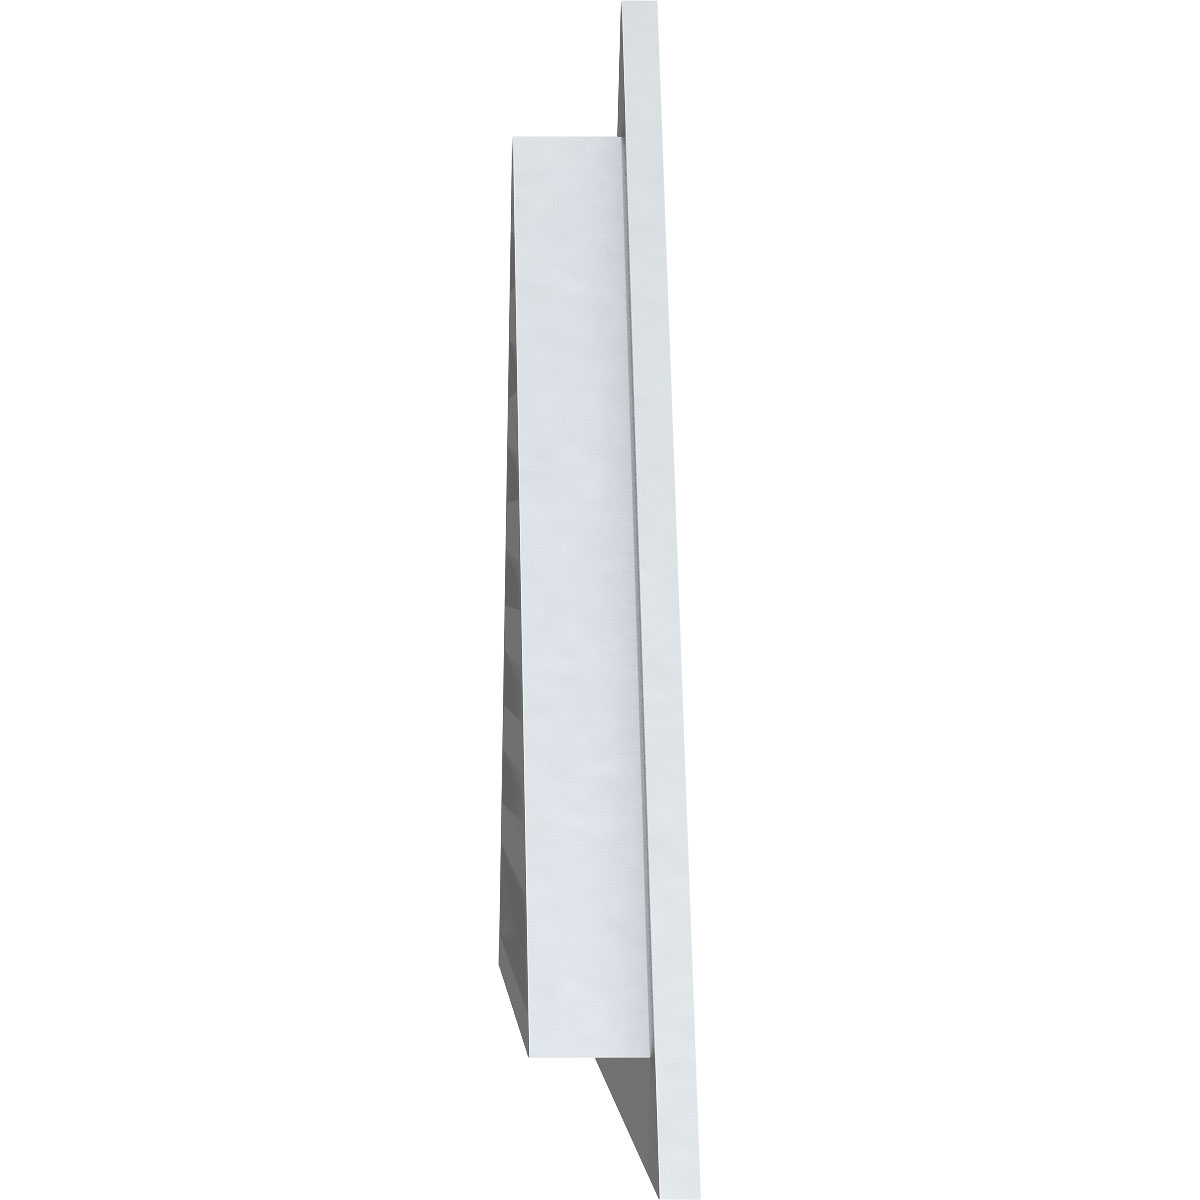 Ekena Millwork 44"W x 14 5/8"H Triangle Gable Vent (60 1/2"W x 20 1/8"H Frame Size) 8/12 Pitch Functional, PVC Gable Vent with 1" x 4" Flat Trim Frame - image 3 of 14